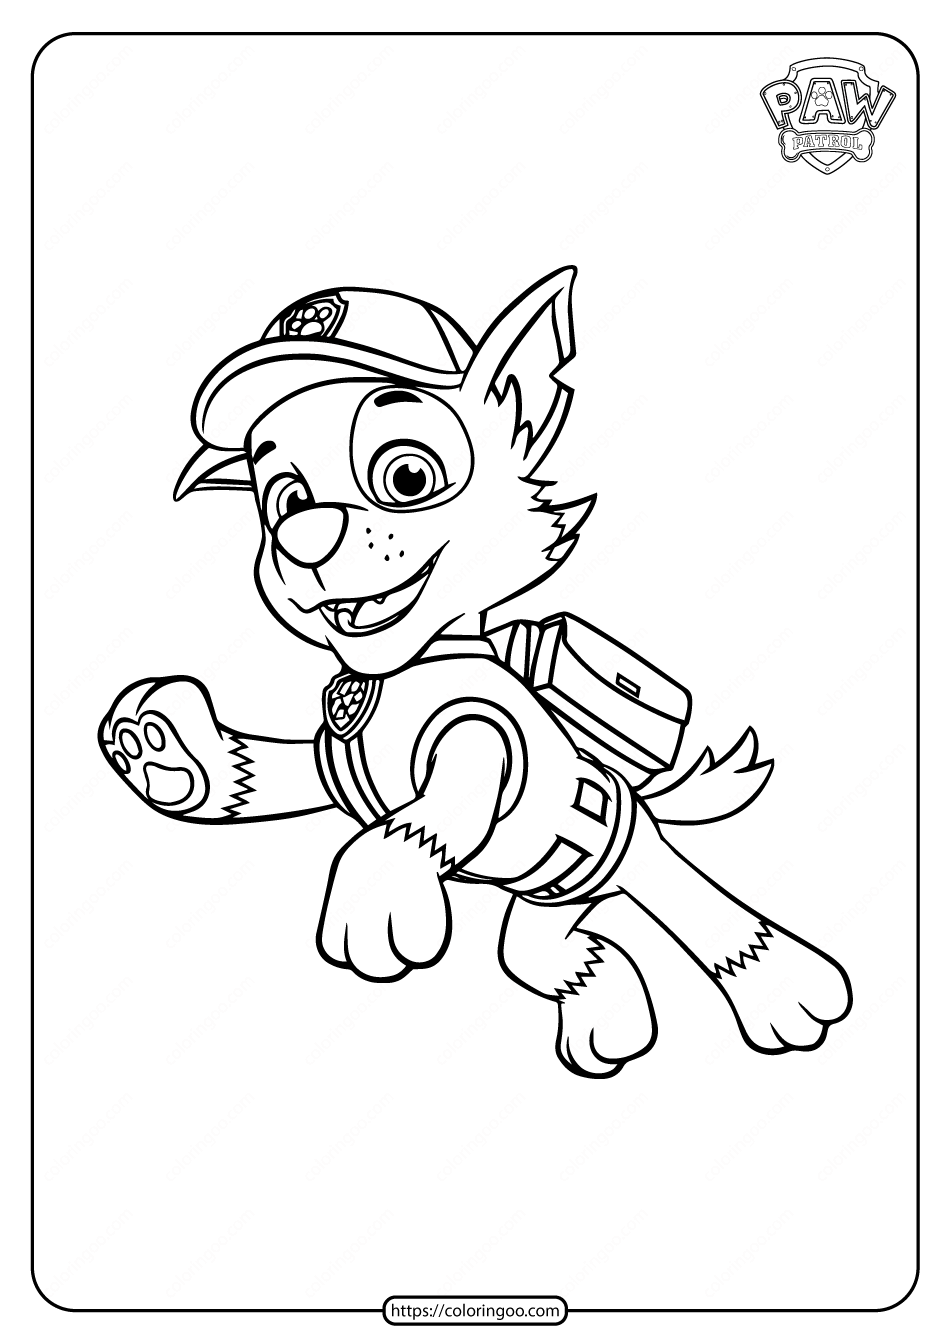 paw patrol rocky coloring pages for kids